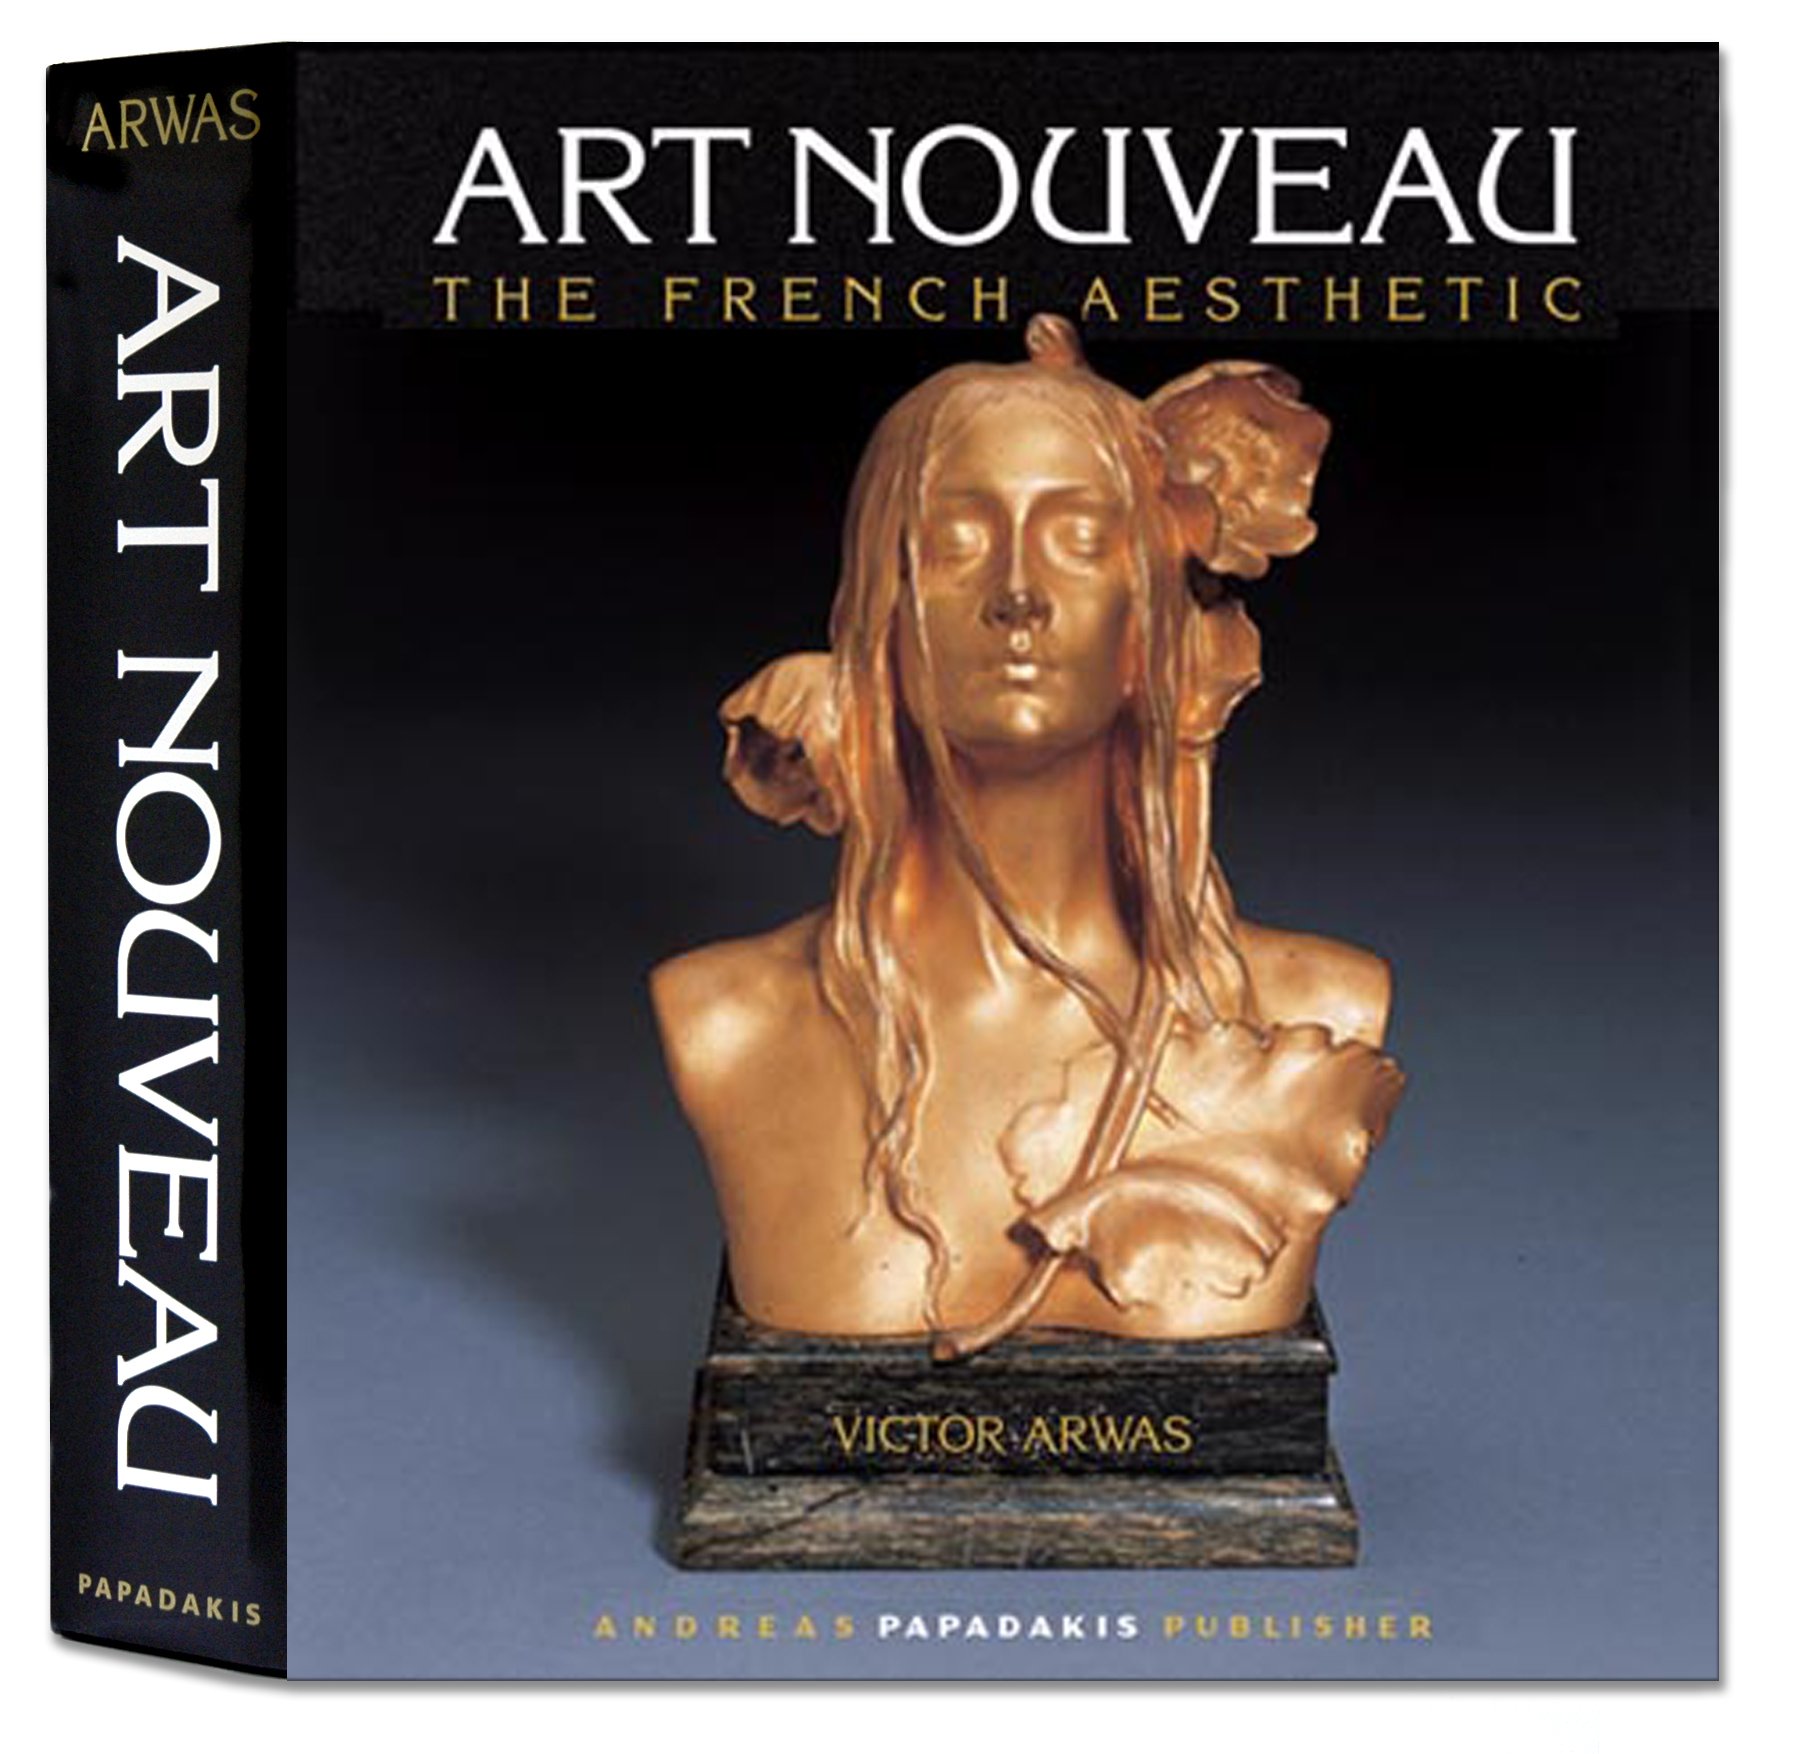 Art nouveau – The french aesthetic